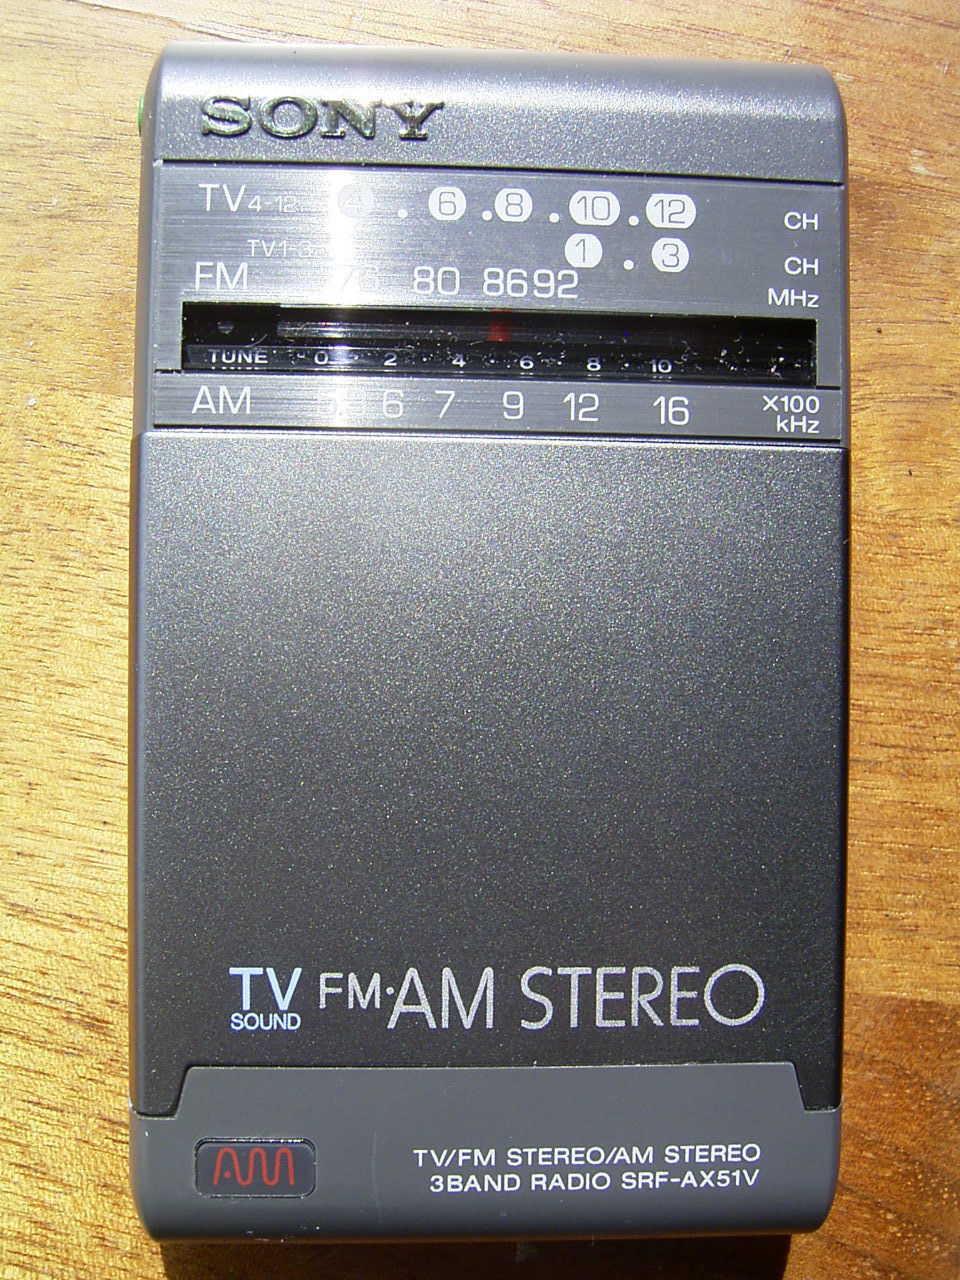 MORE AM STEREO STUFF!